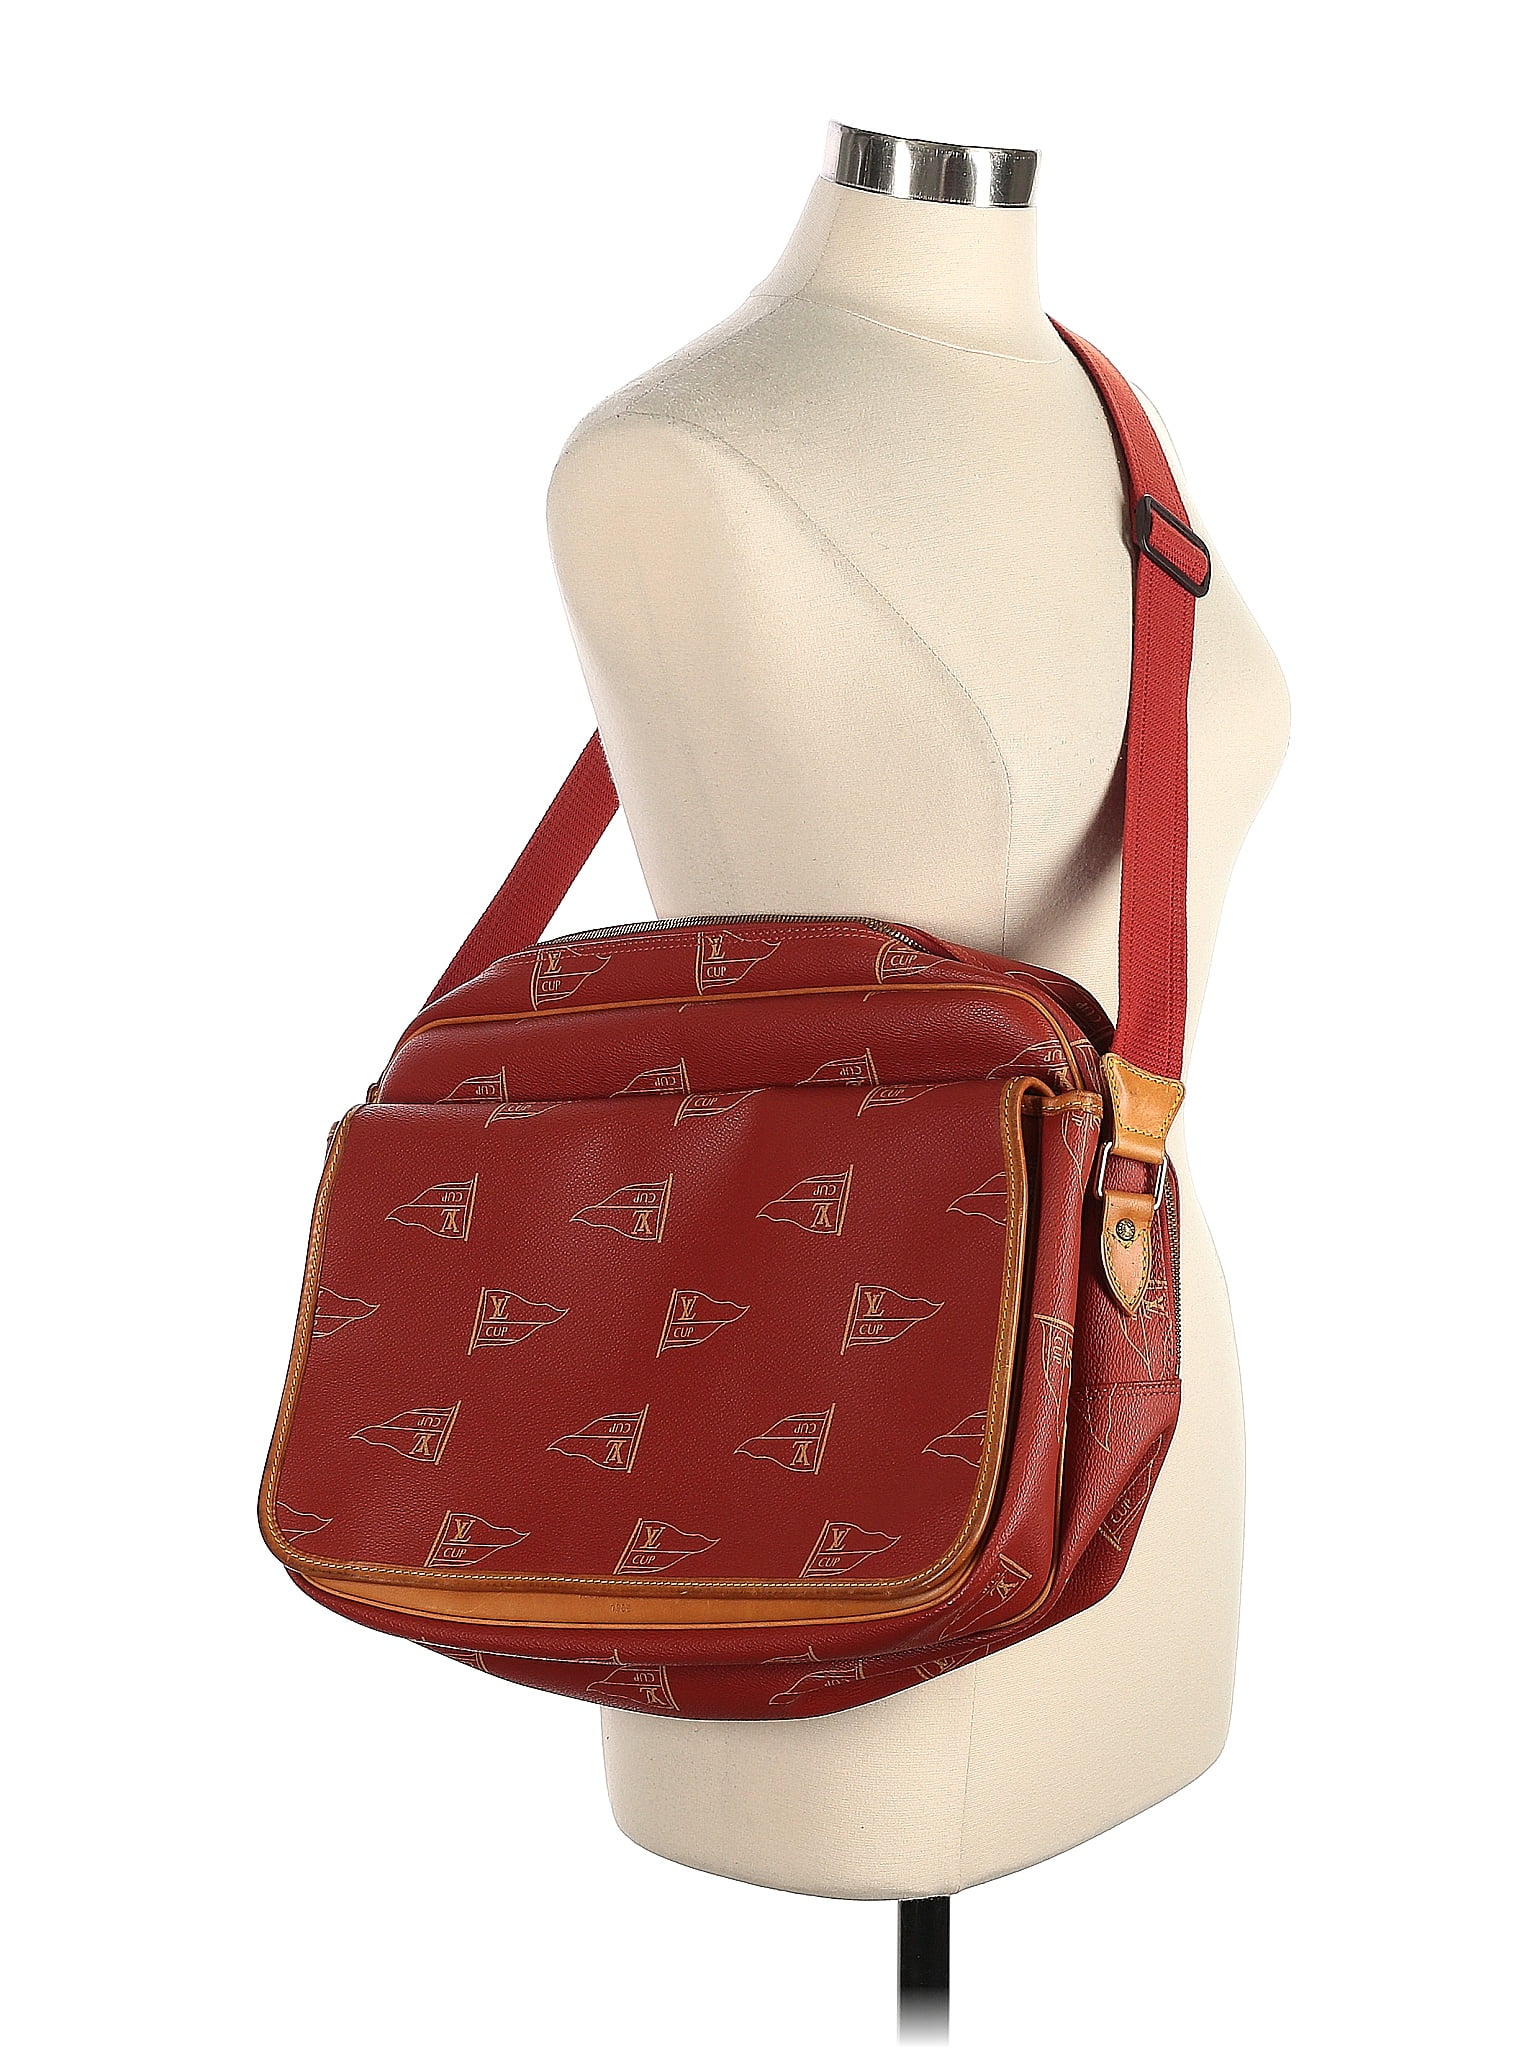 Louis Vuitton Messenger On Sale Up To 90% Off Retail